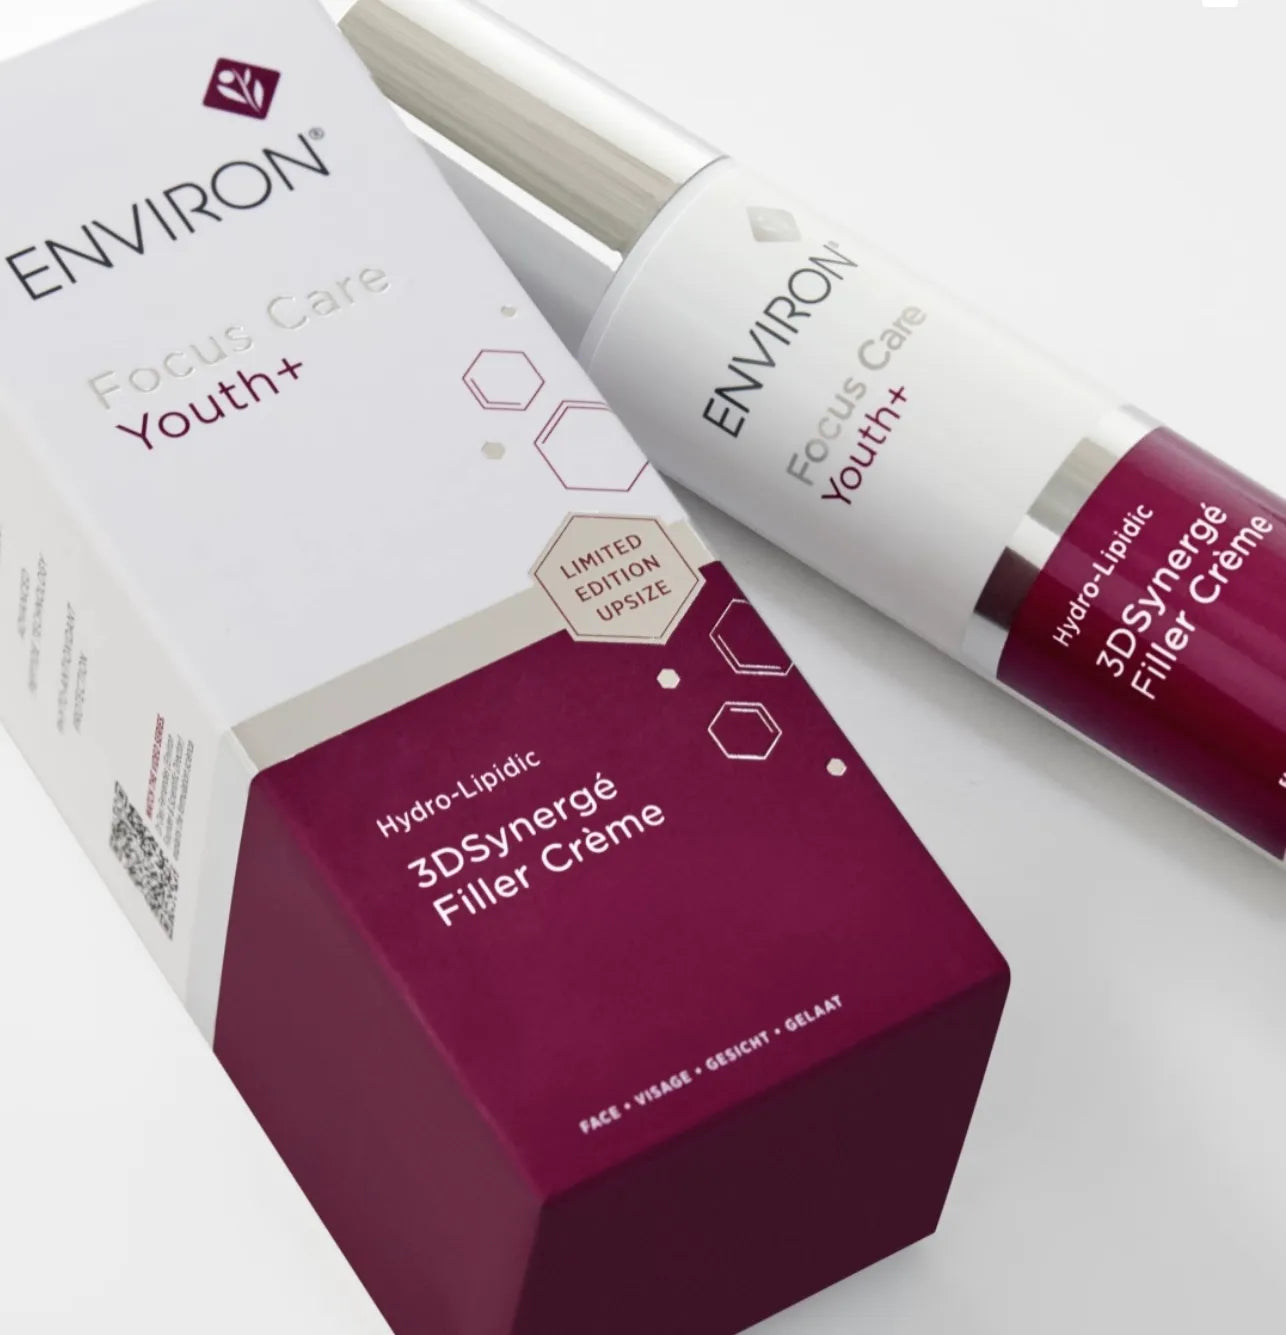 Environ Focus Care Youth+